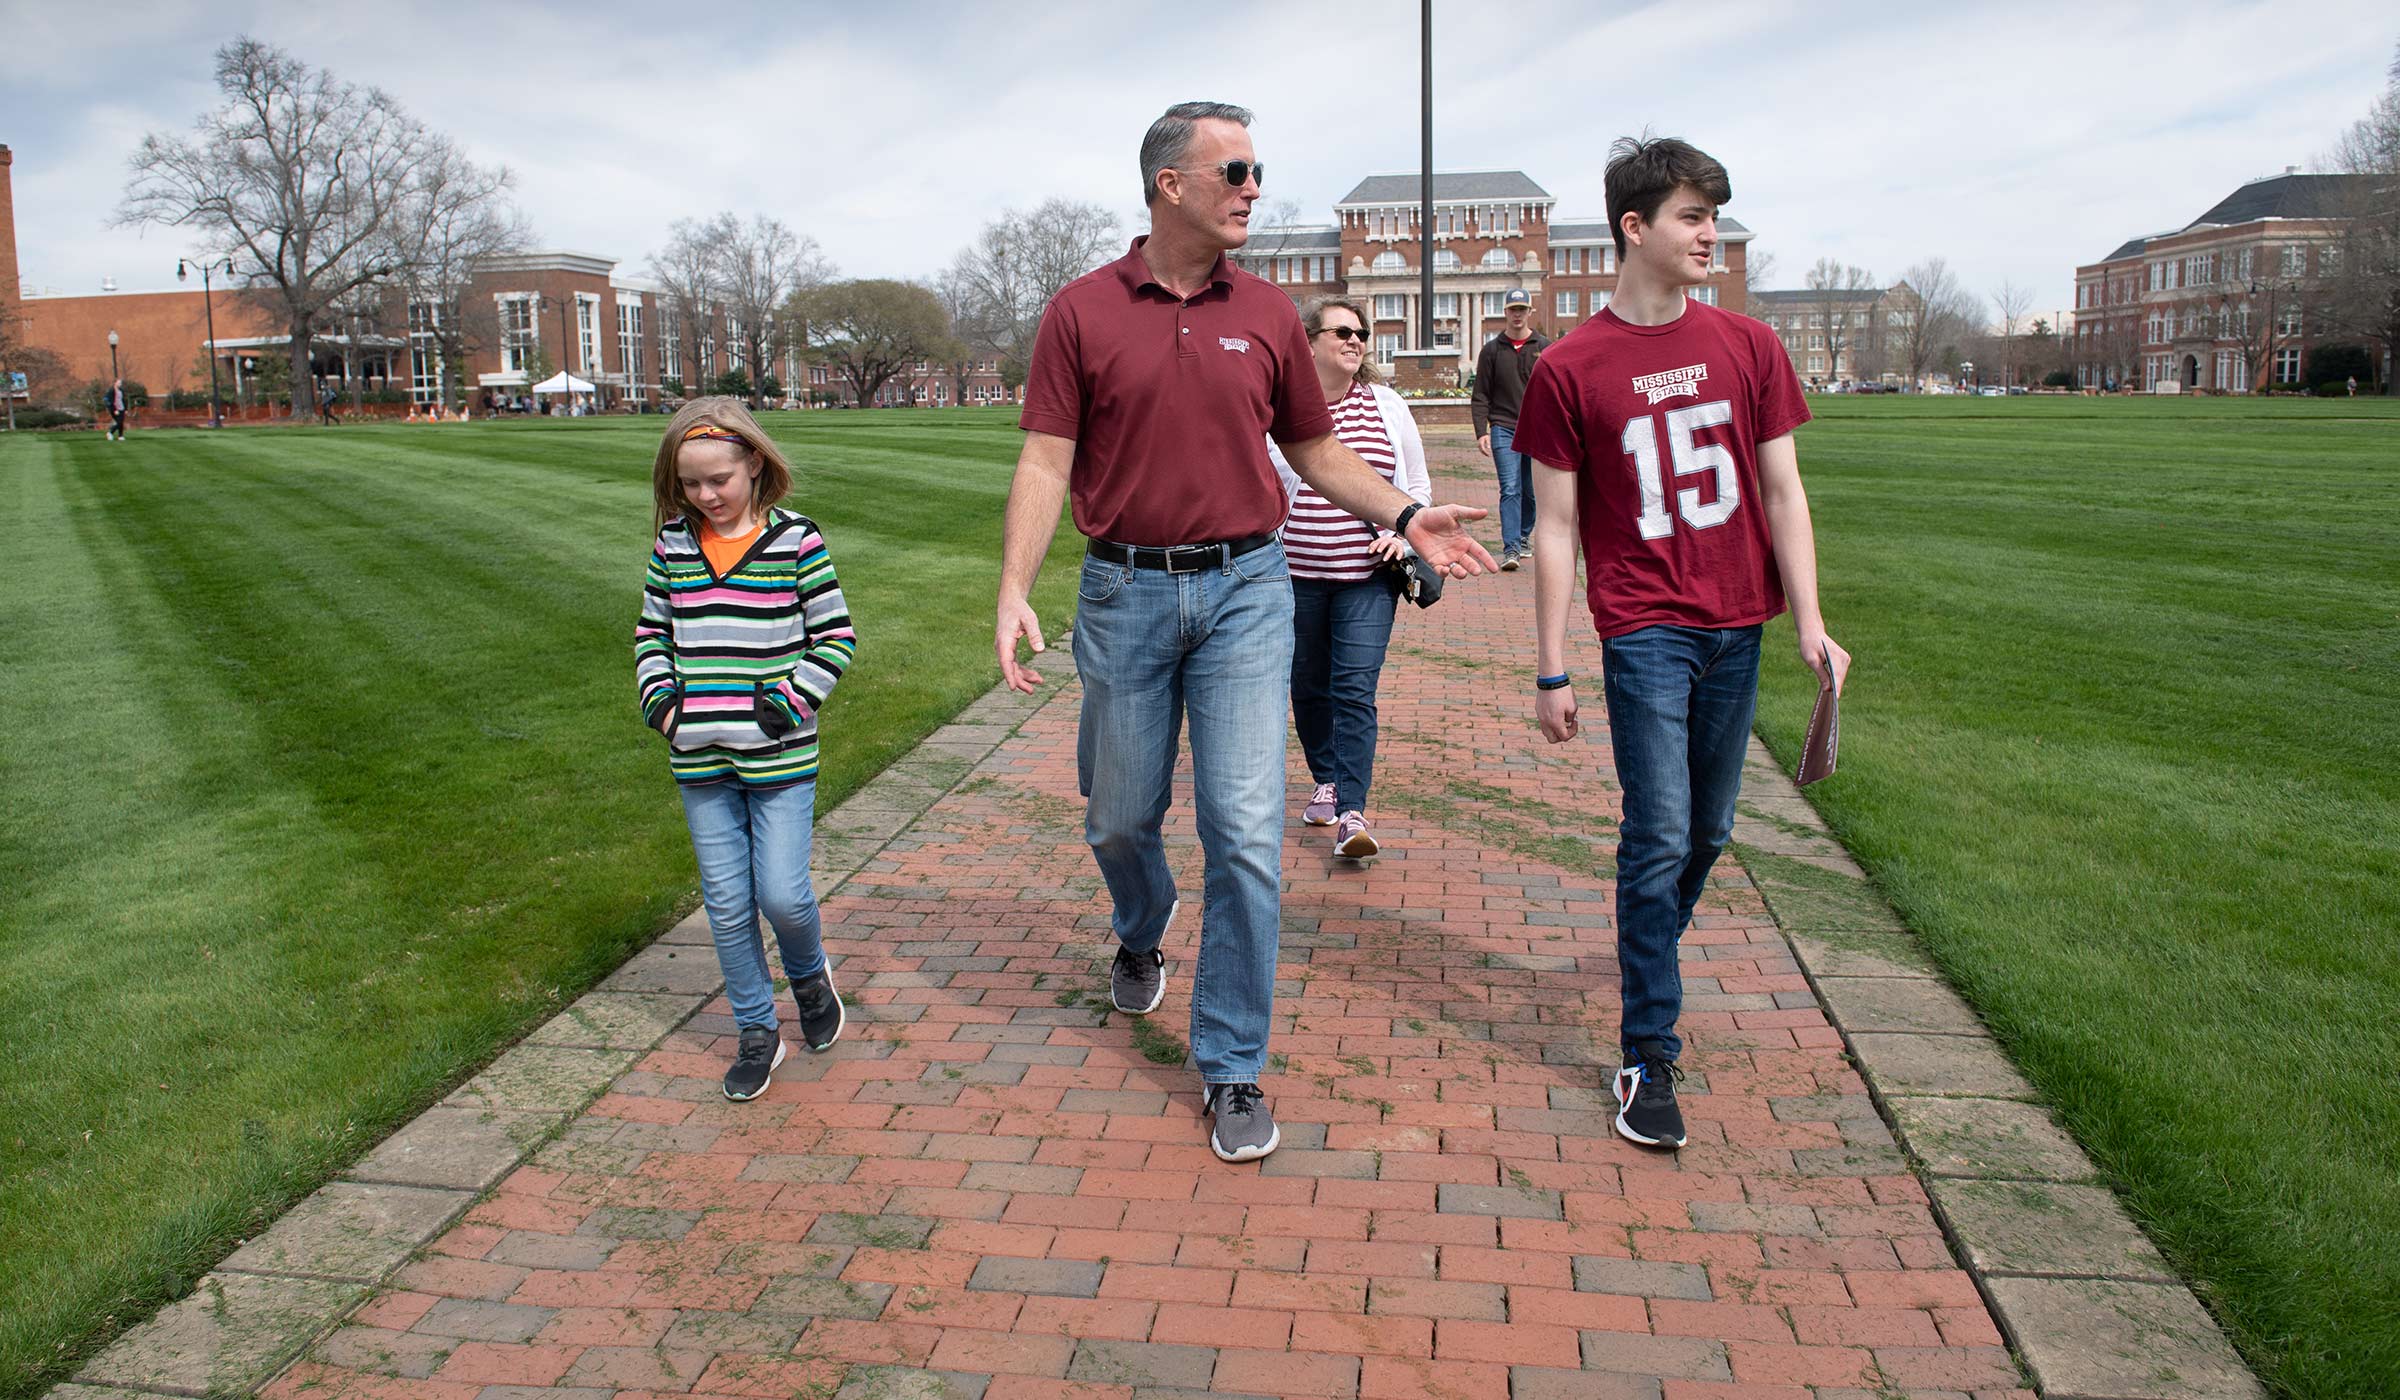 Surrounded by the freshly mown grass of the Drill Field, the Brooks family walks down the central sidewalk, pointing out the sights to their two children.